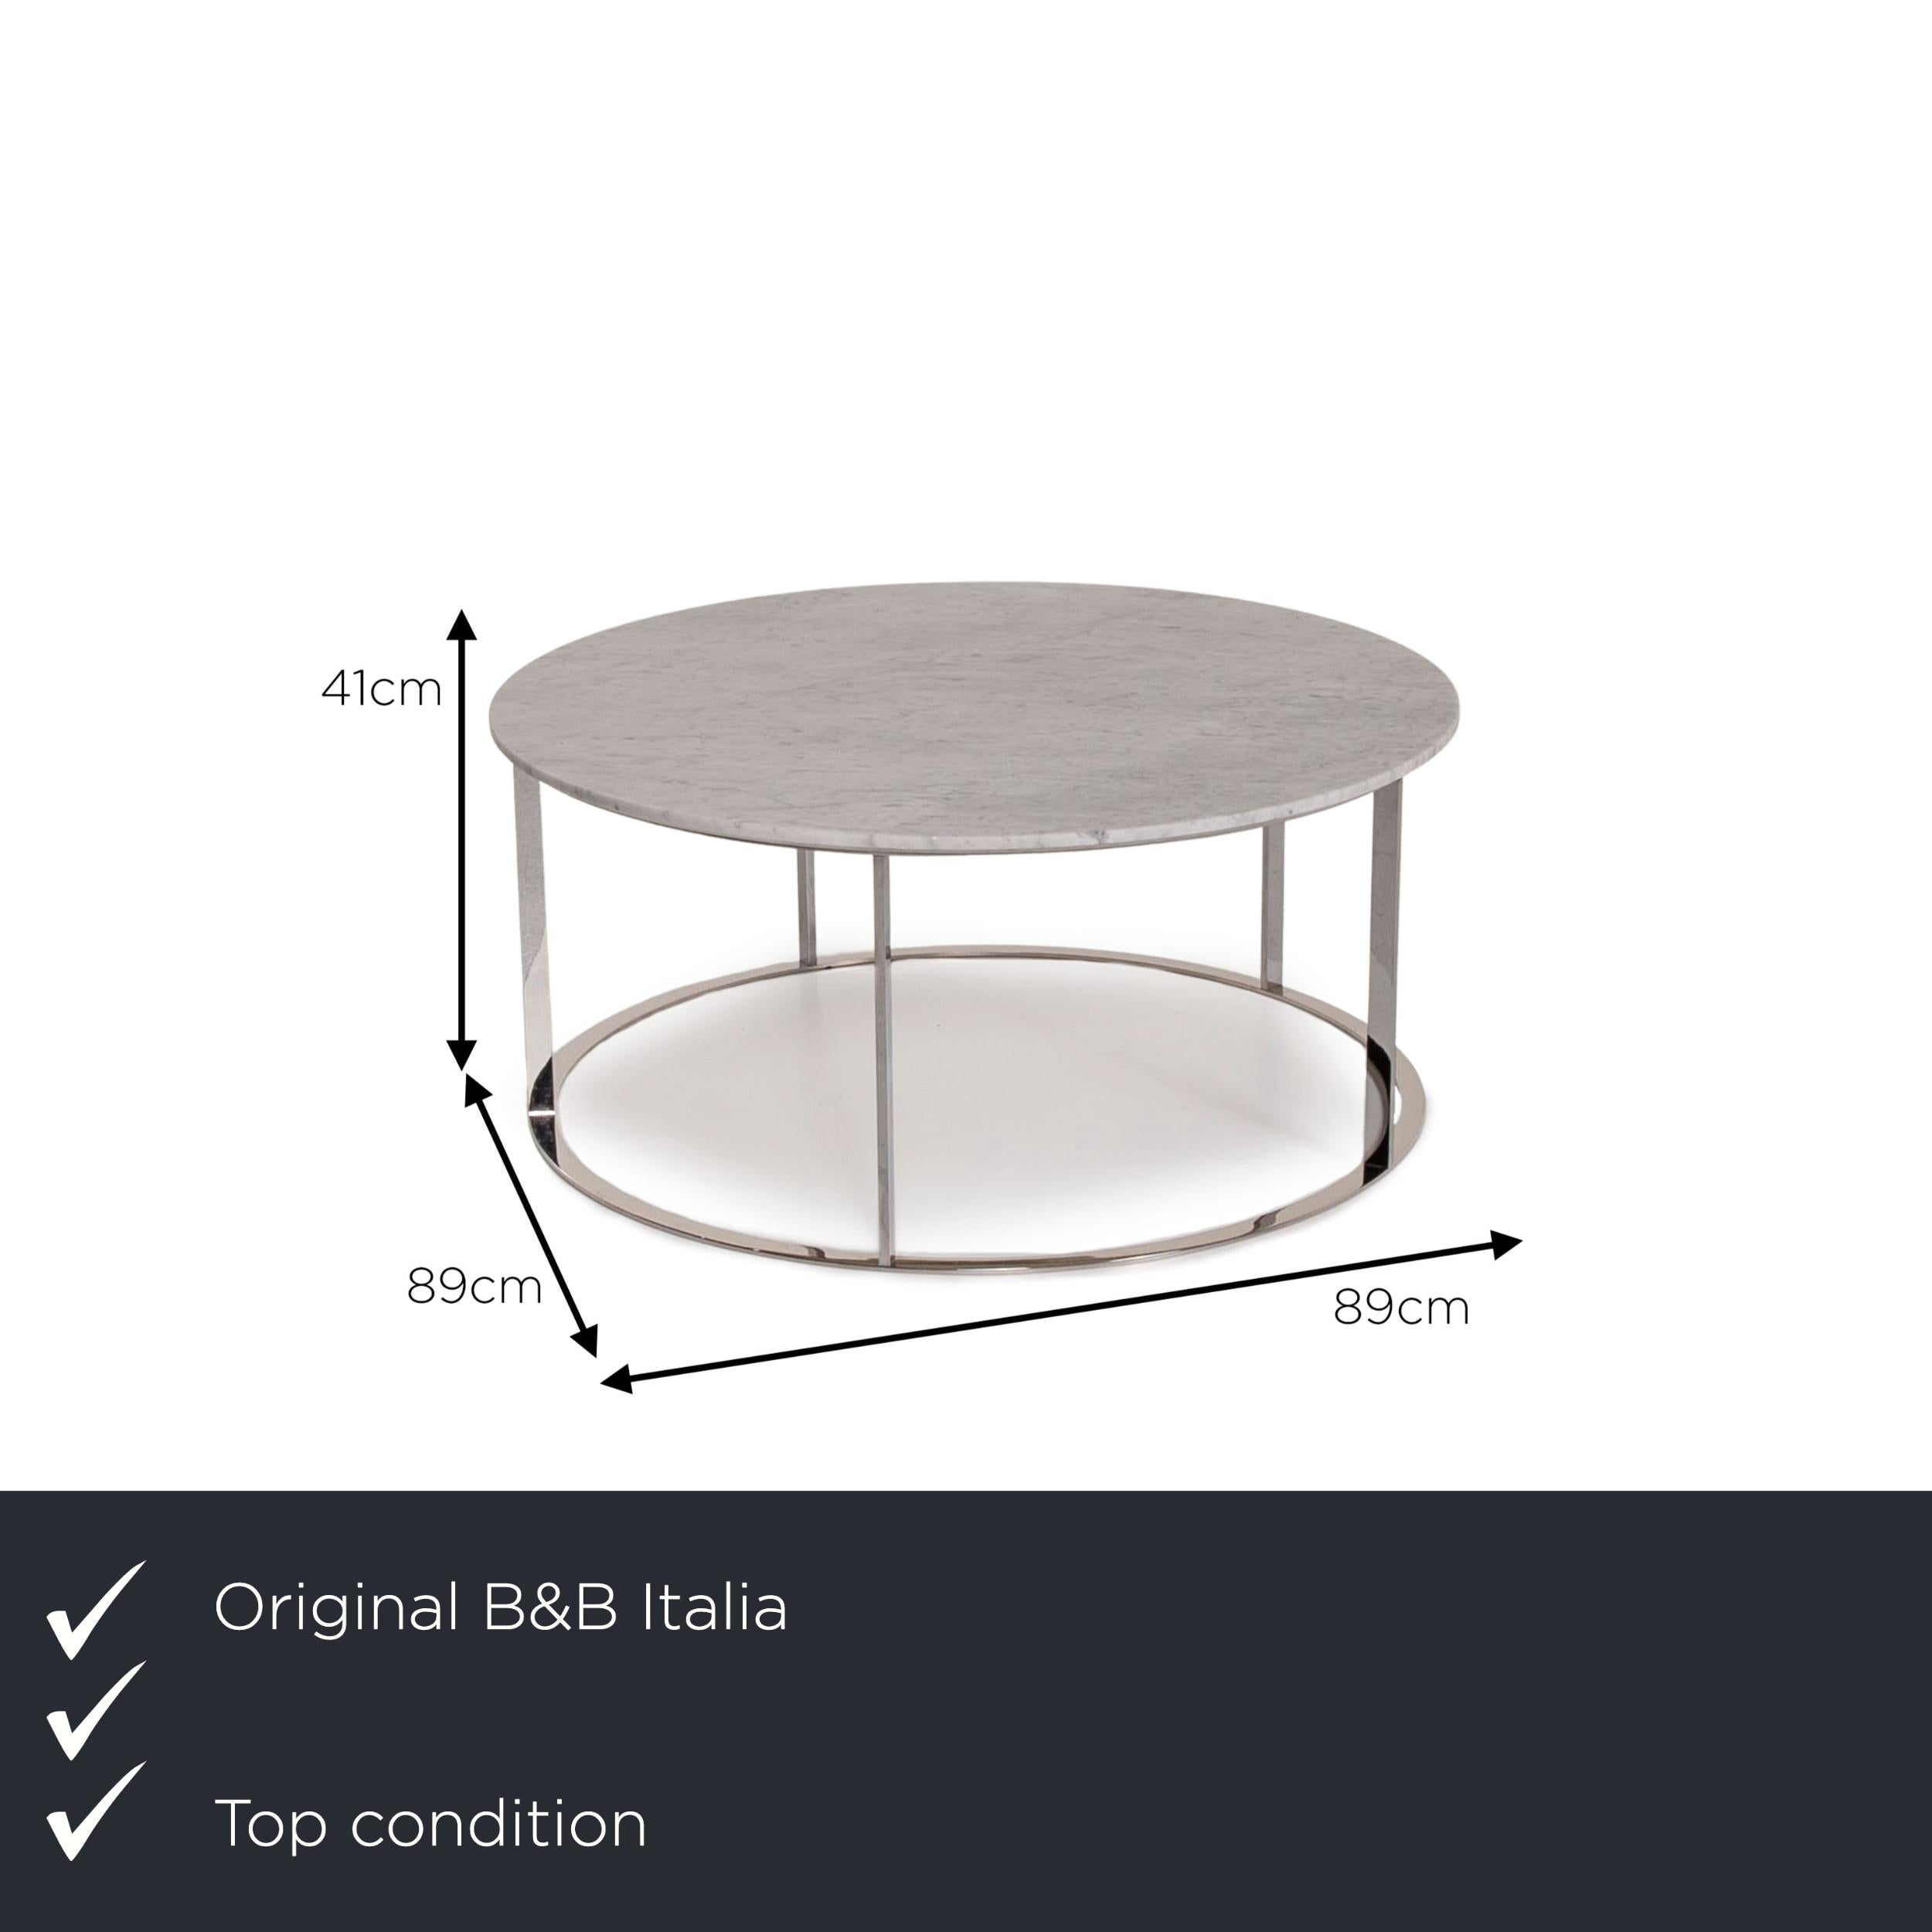 We present to you a B&B Italia Mera marble table white coffee table.

Product measurements in centimeters:

depth: 89
width: 89
height: 41
seat height: 
rest height: 
seat depth: 
seat width: 
back height:

 